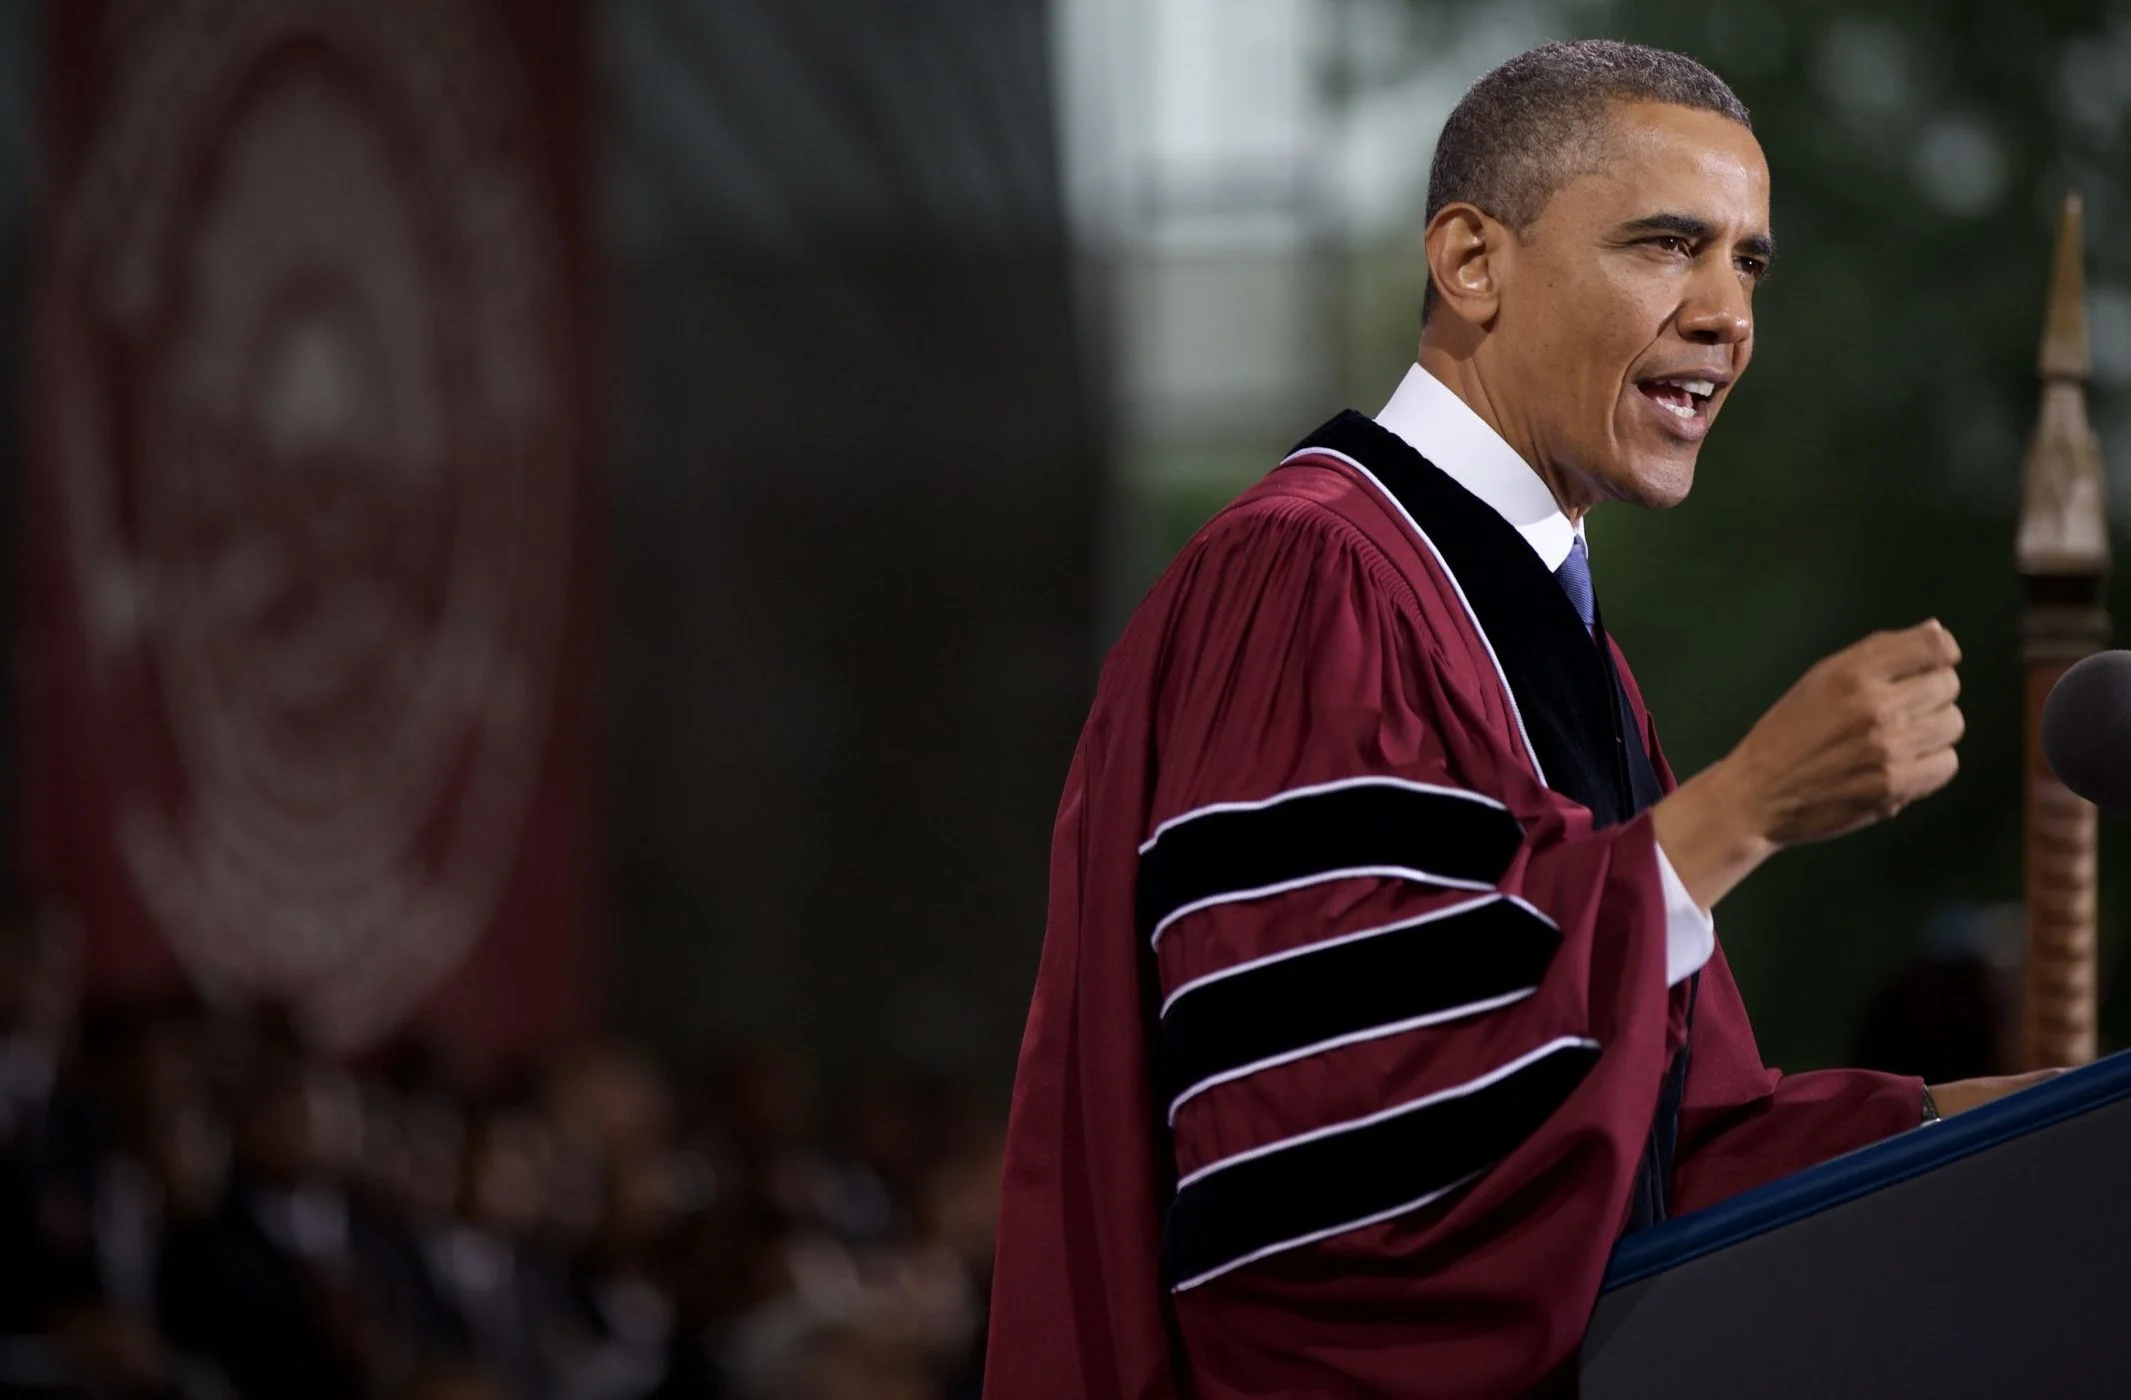 President Barack Obama delivers remarks during the commencement ceremony at Morehouse College in Atlanta, Georgia